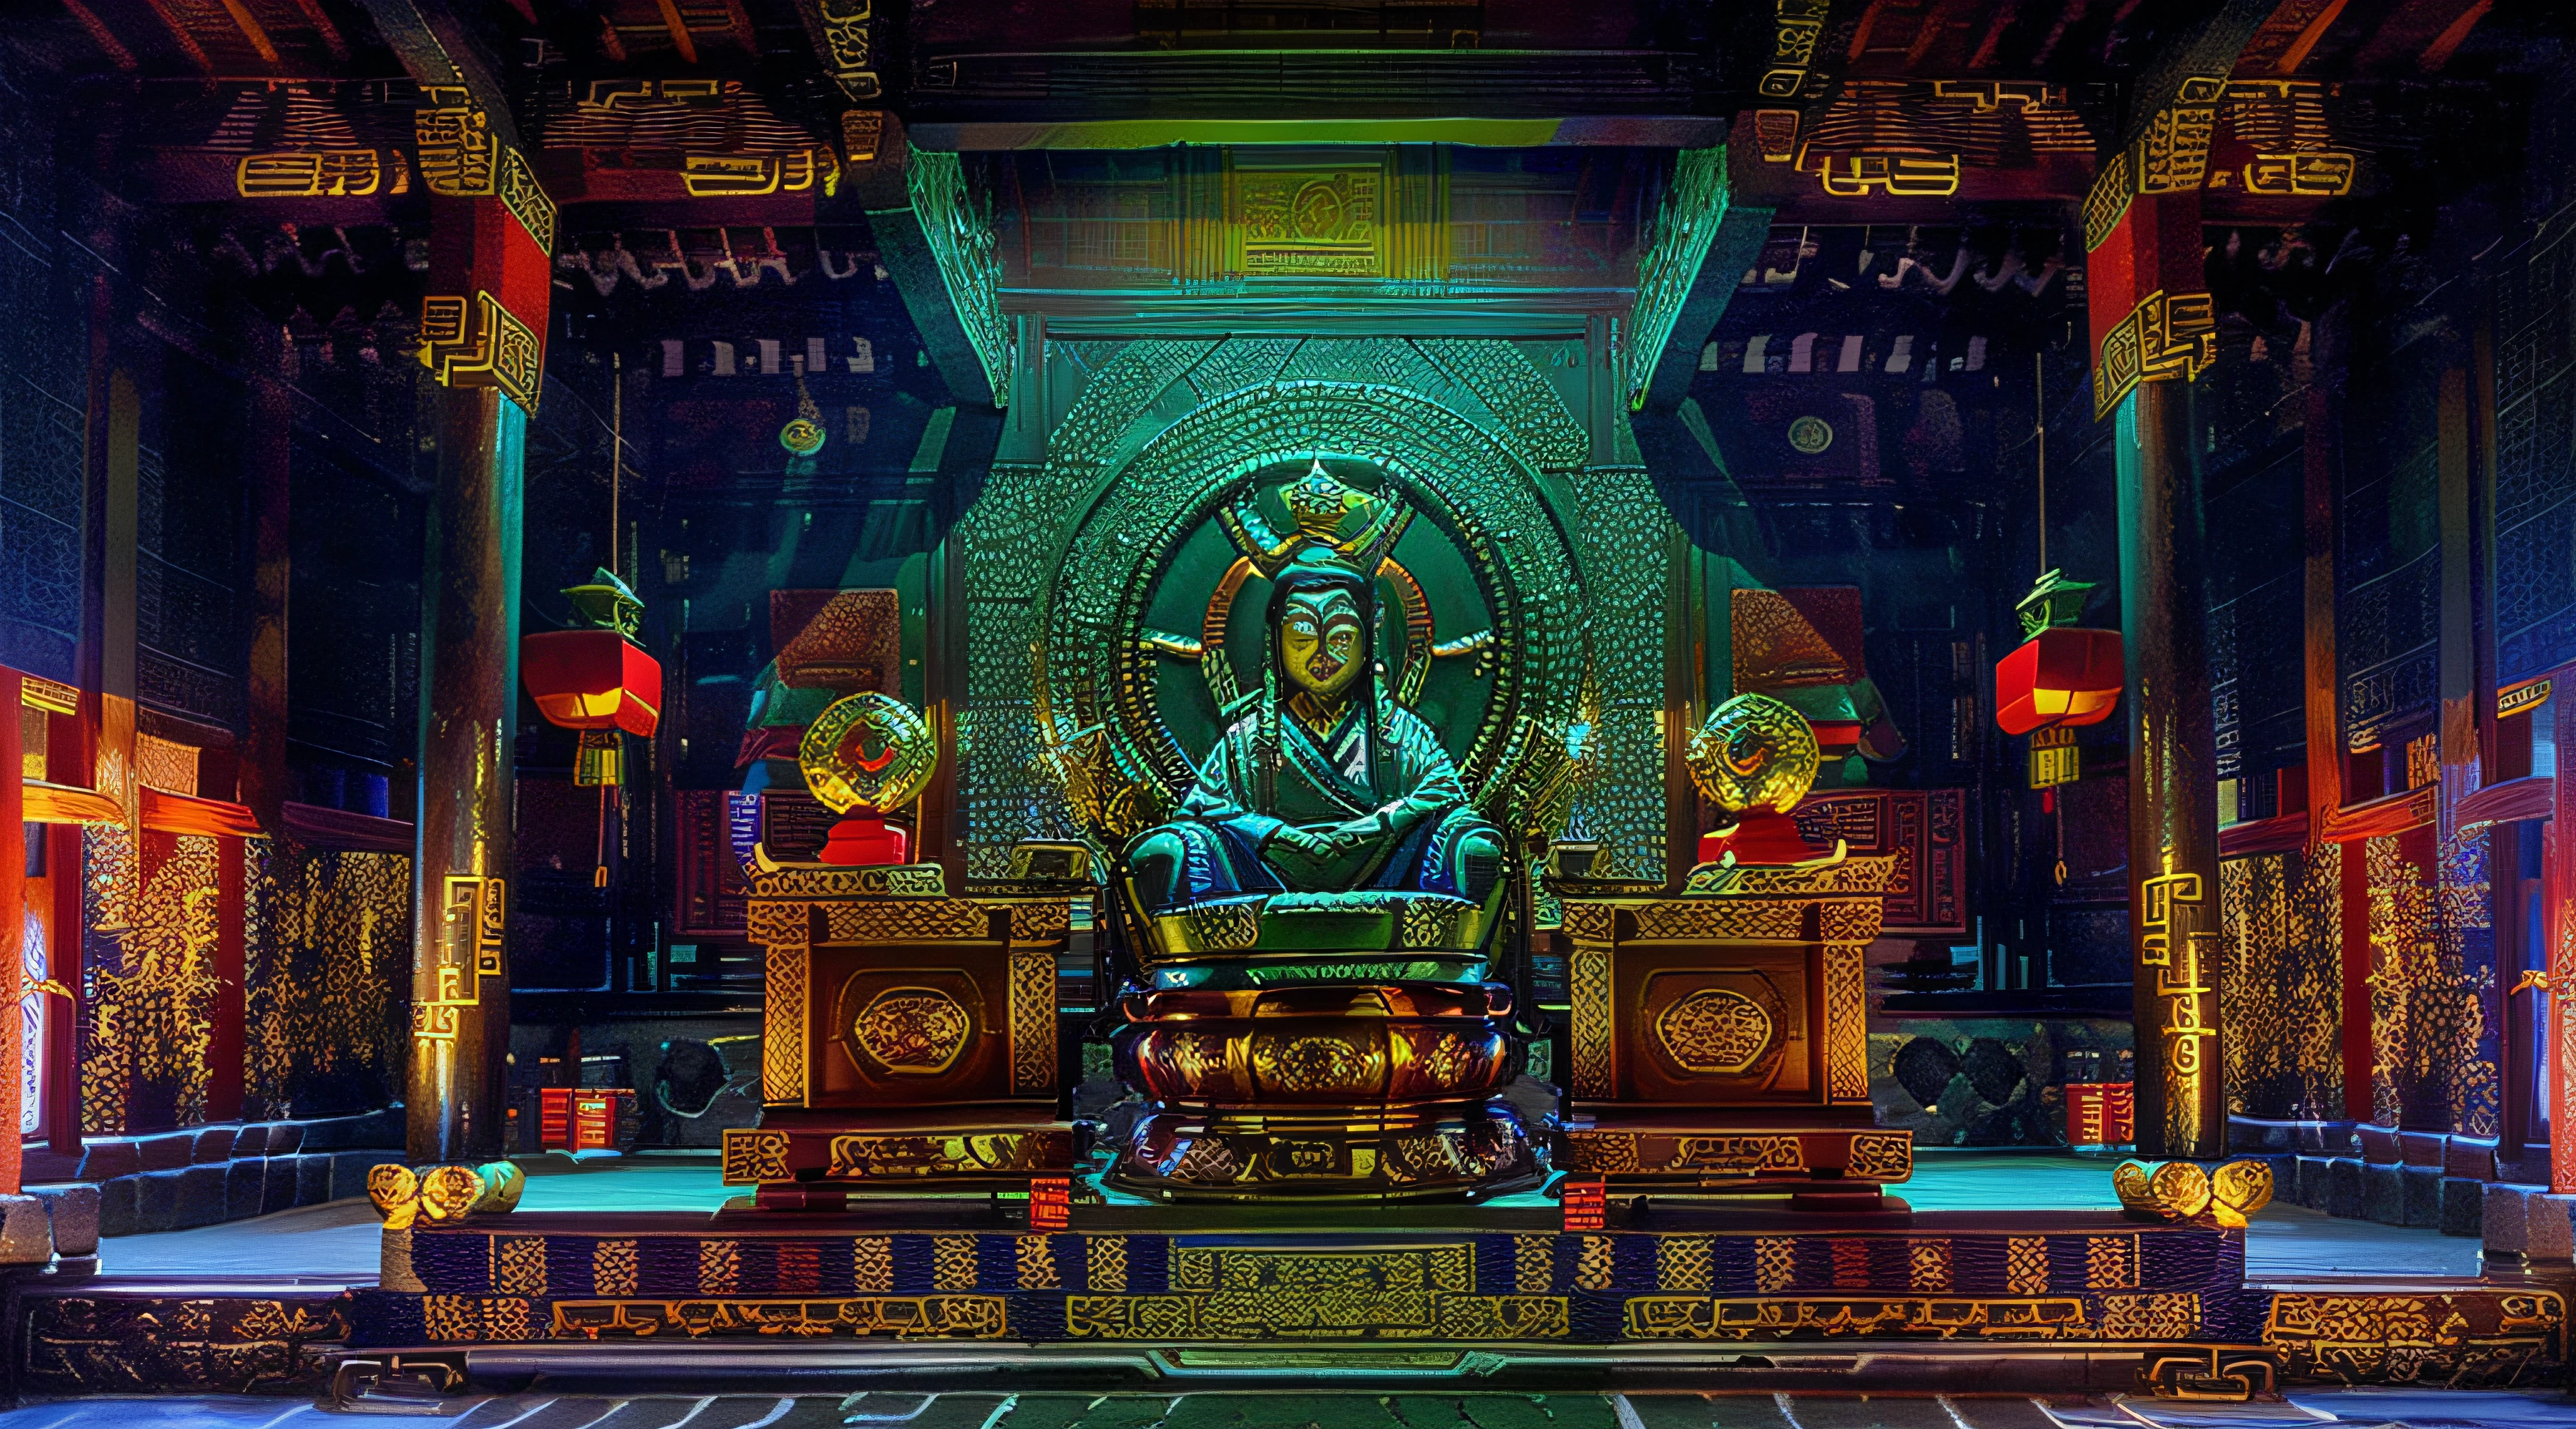 There is a large fountain in a building with a red carpet, Cyberpunk Chinese Ancient Castle, Templo DMT, Sala do Trono, Beautiful Rendering of the Tang Dynasty, Sala do trono primorosamente projetada, Sala do trono decadente, em uma sala do trono, Japanese Cyberpunk Temple, Motivos imperiais brilhantes, arquitetura colorida de warcraft, rustic throne room, Chinese palace, from inside the giant palace